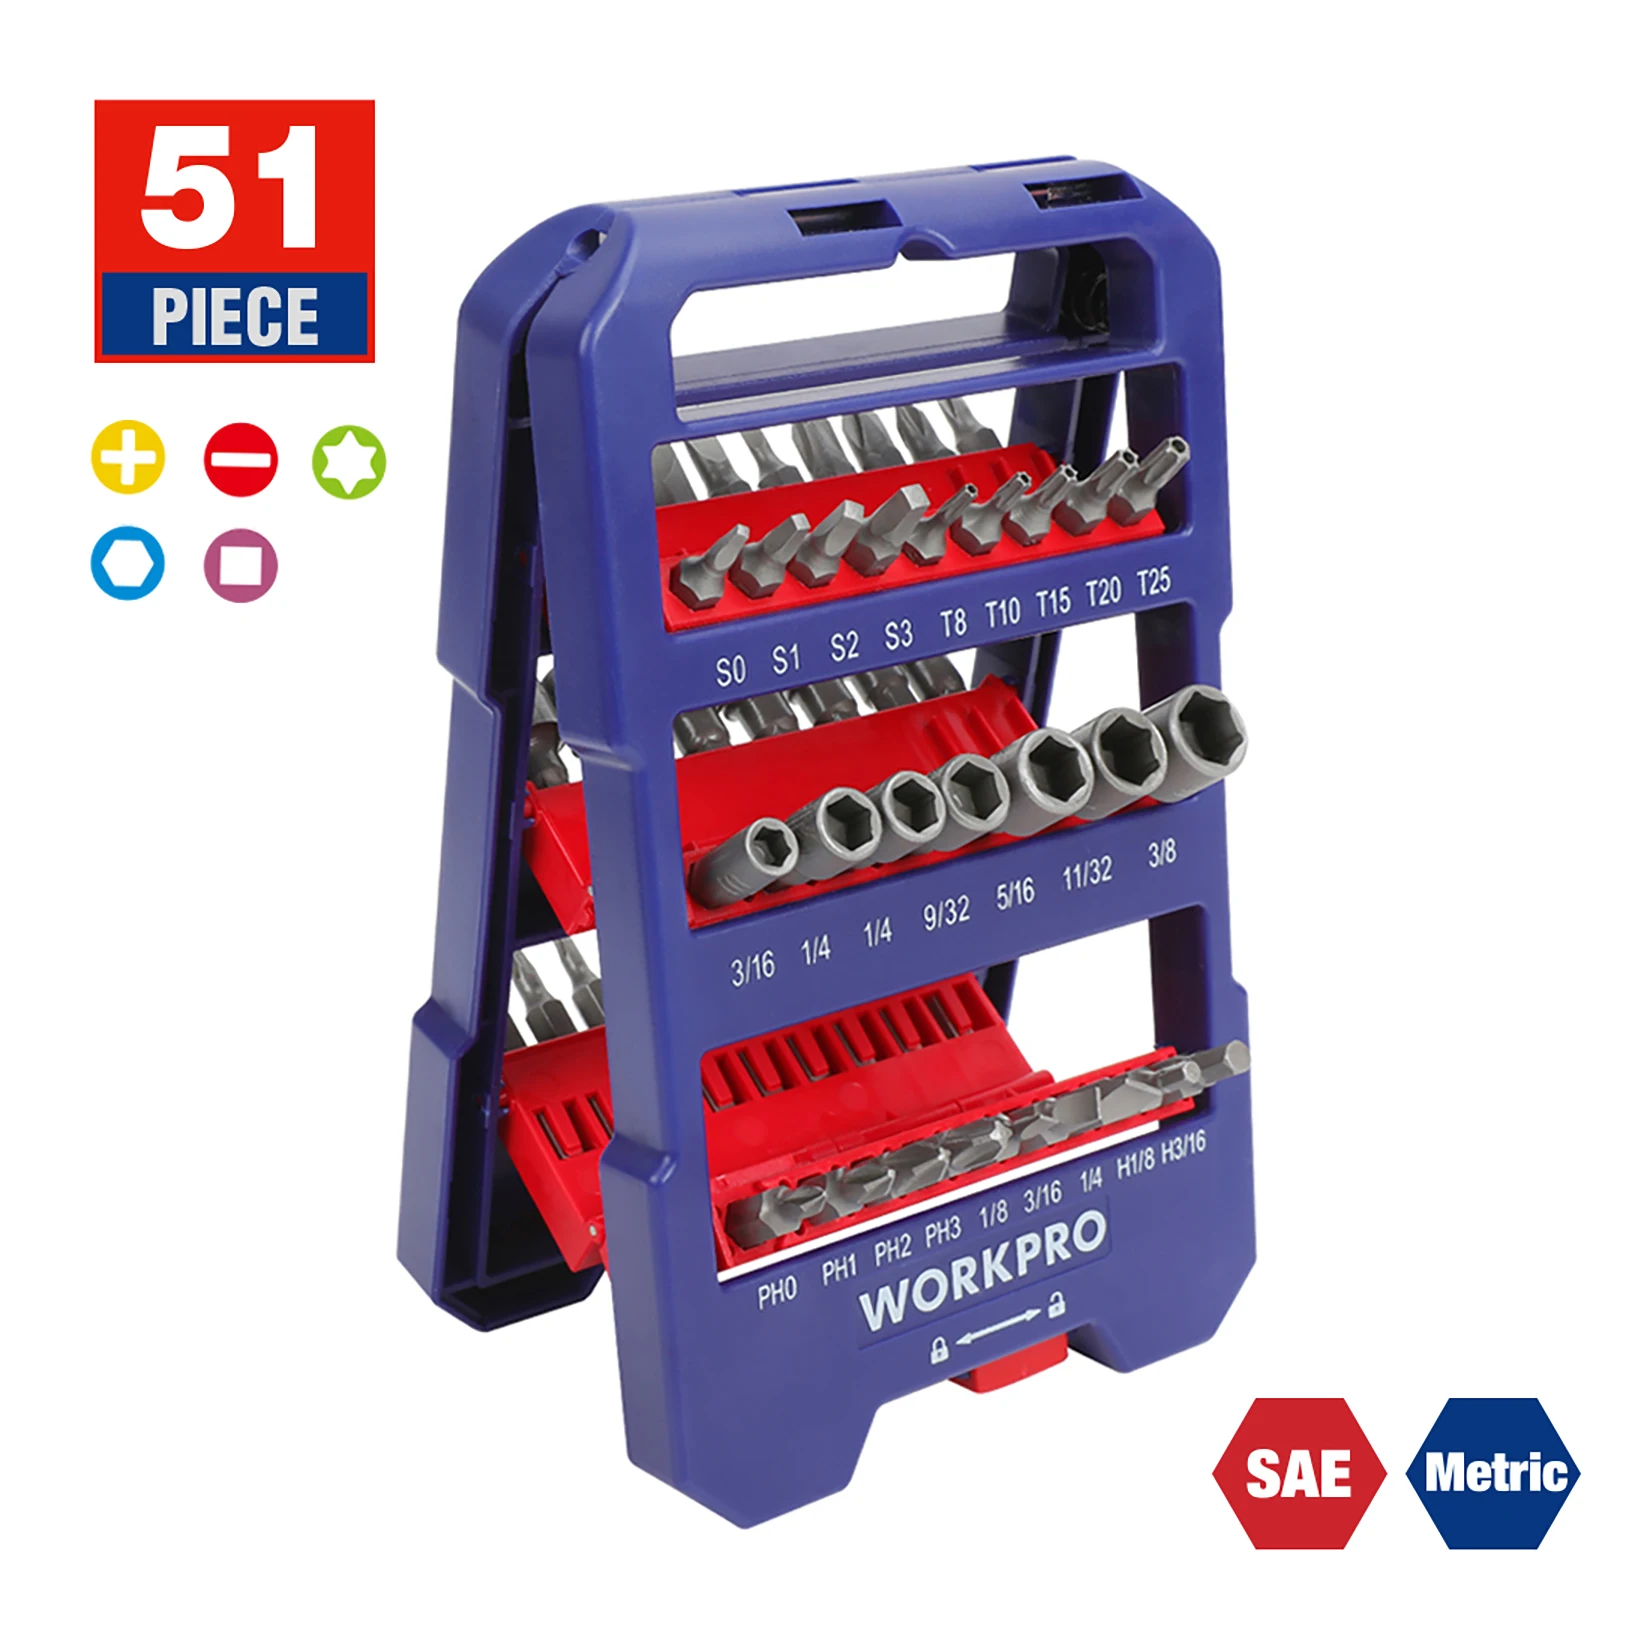 

WORKPRO 51pcs Auto Opening Bits Box, 51-piece Screwdriver Bit Set with Slotted/Phillips/Torx/Hex Bits and Nut Driver